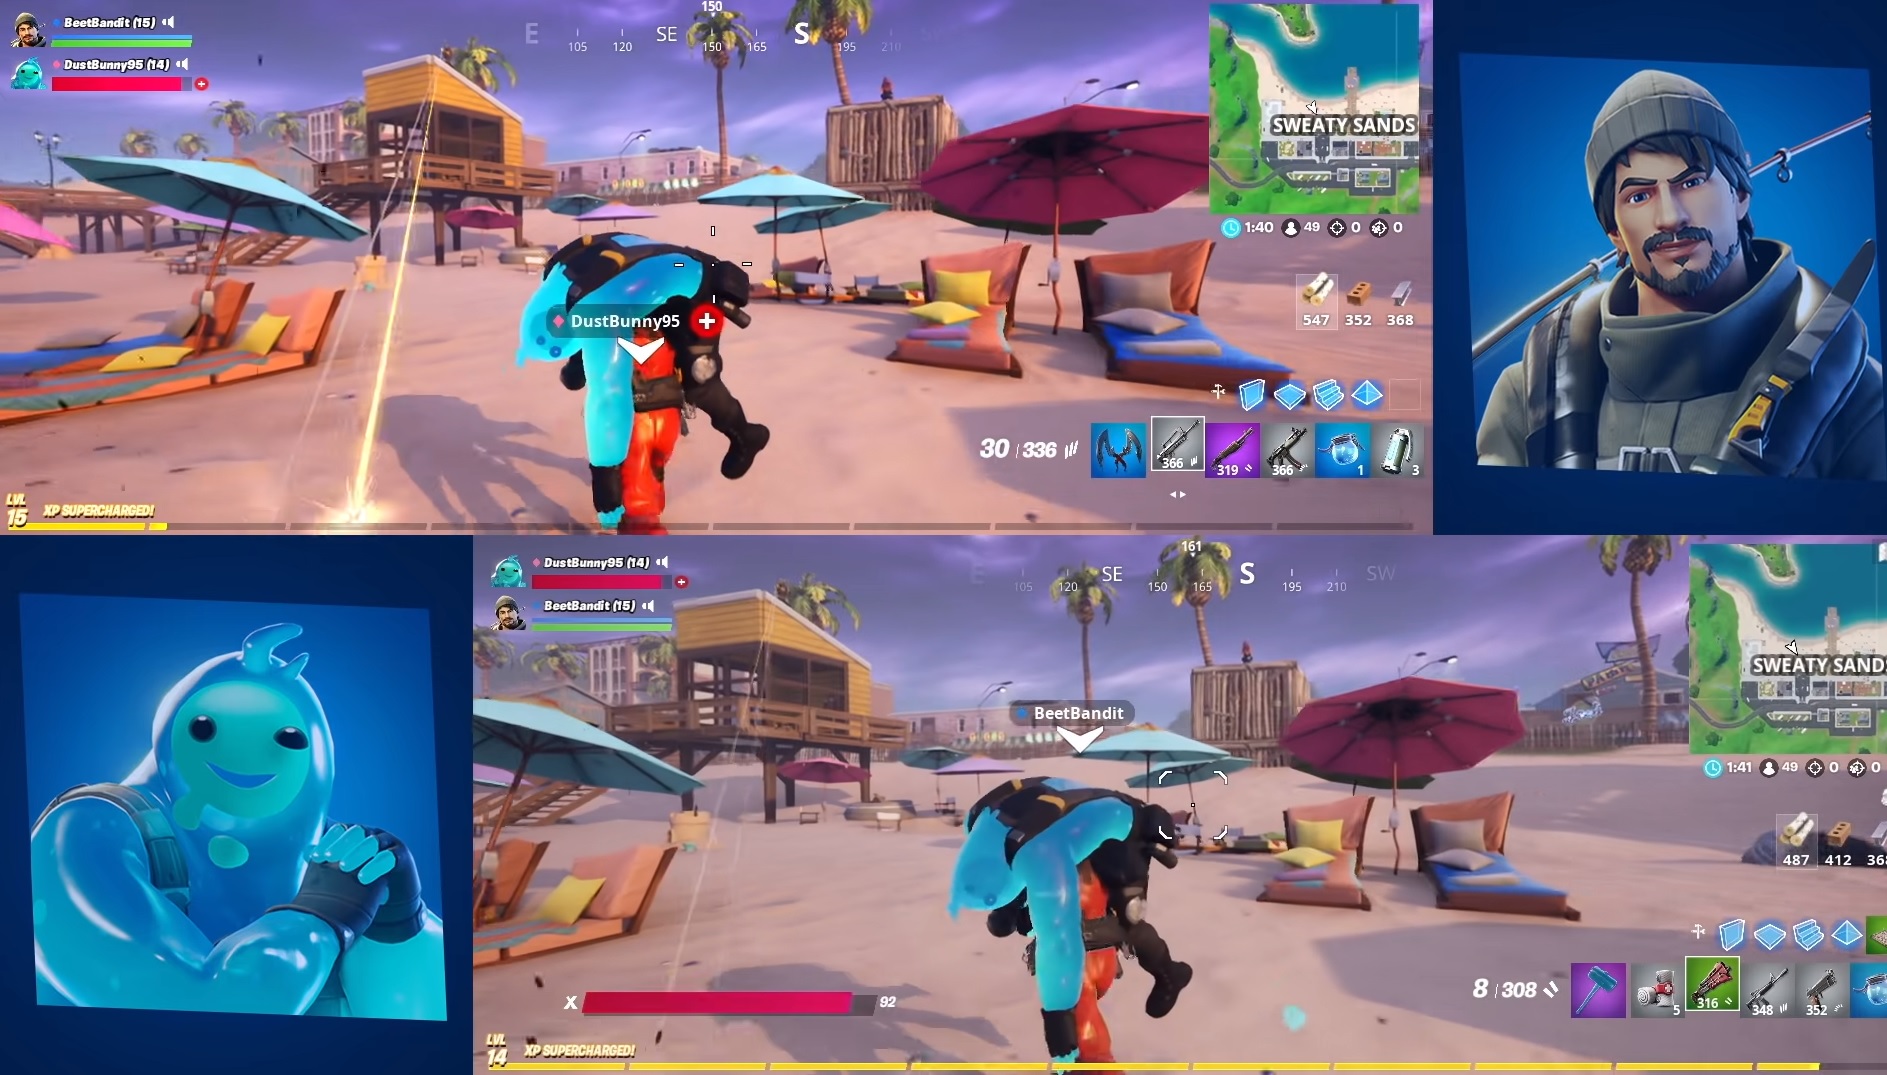 How to do 2 player split screen on Xbox Fortnite?